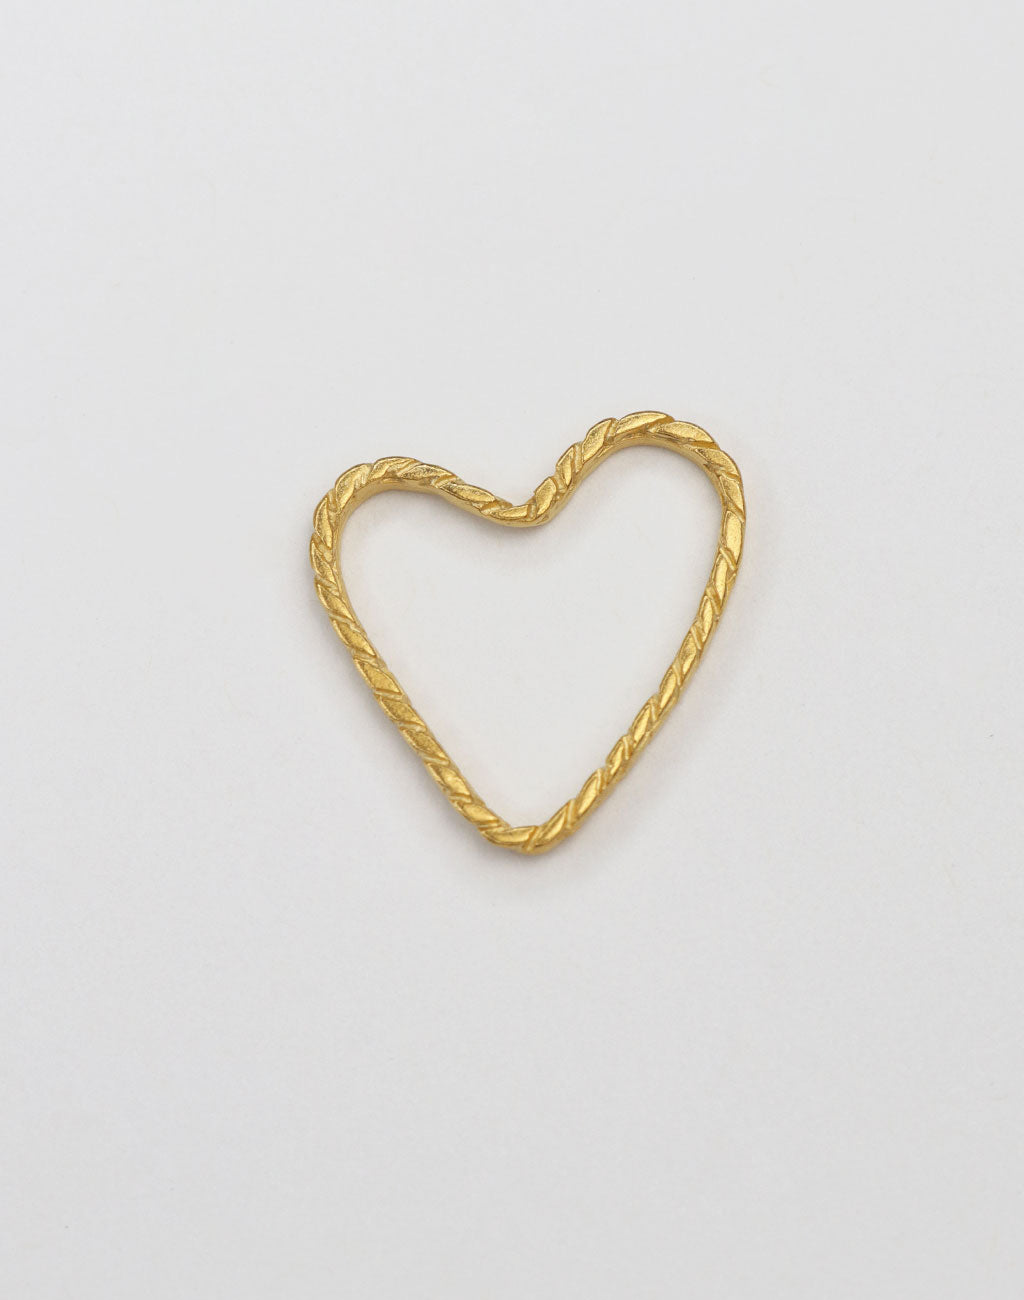 Braided Heart Outline, 22x20mm (1pc)